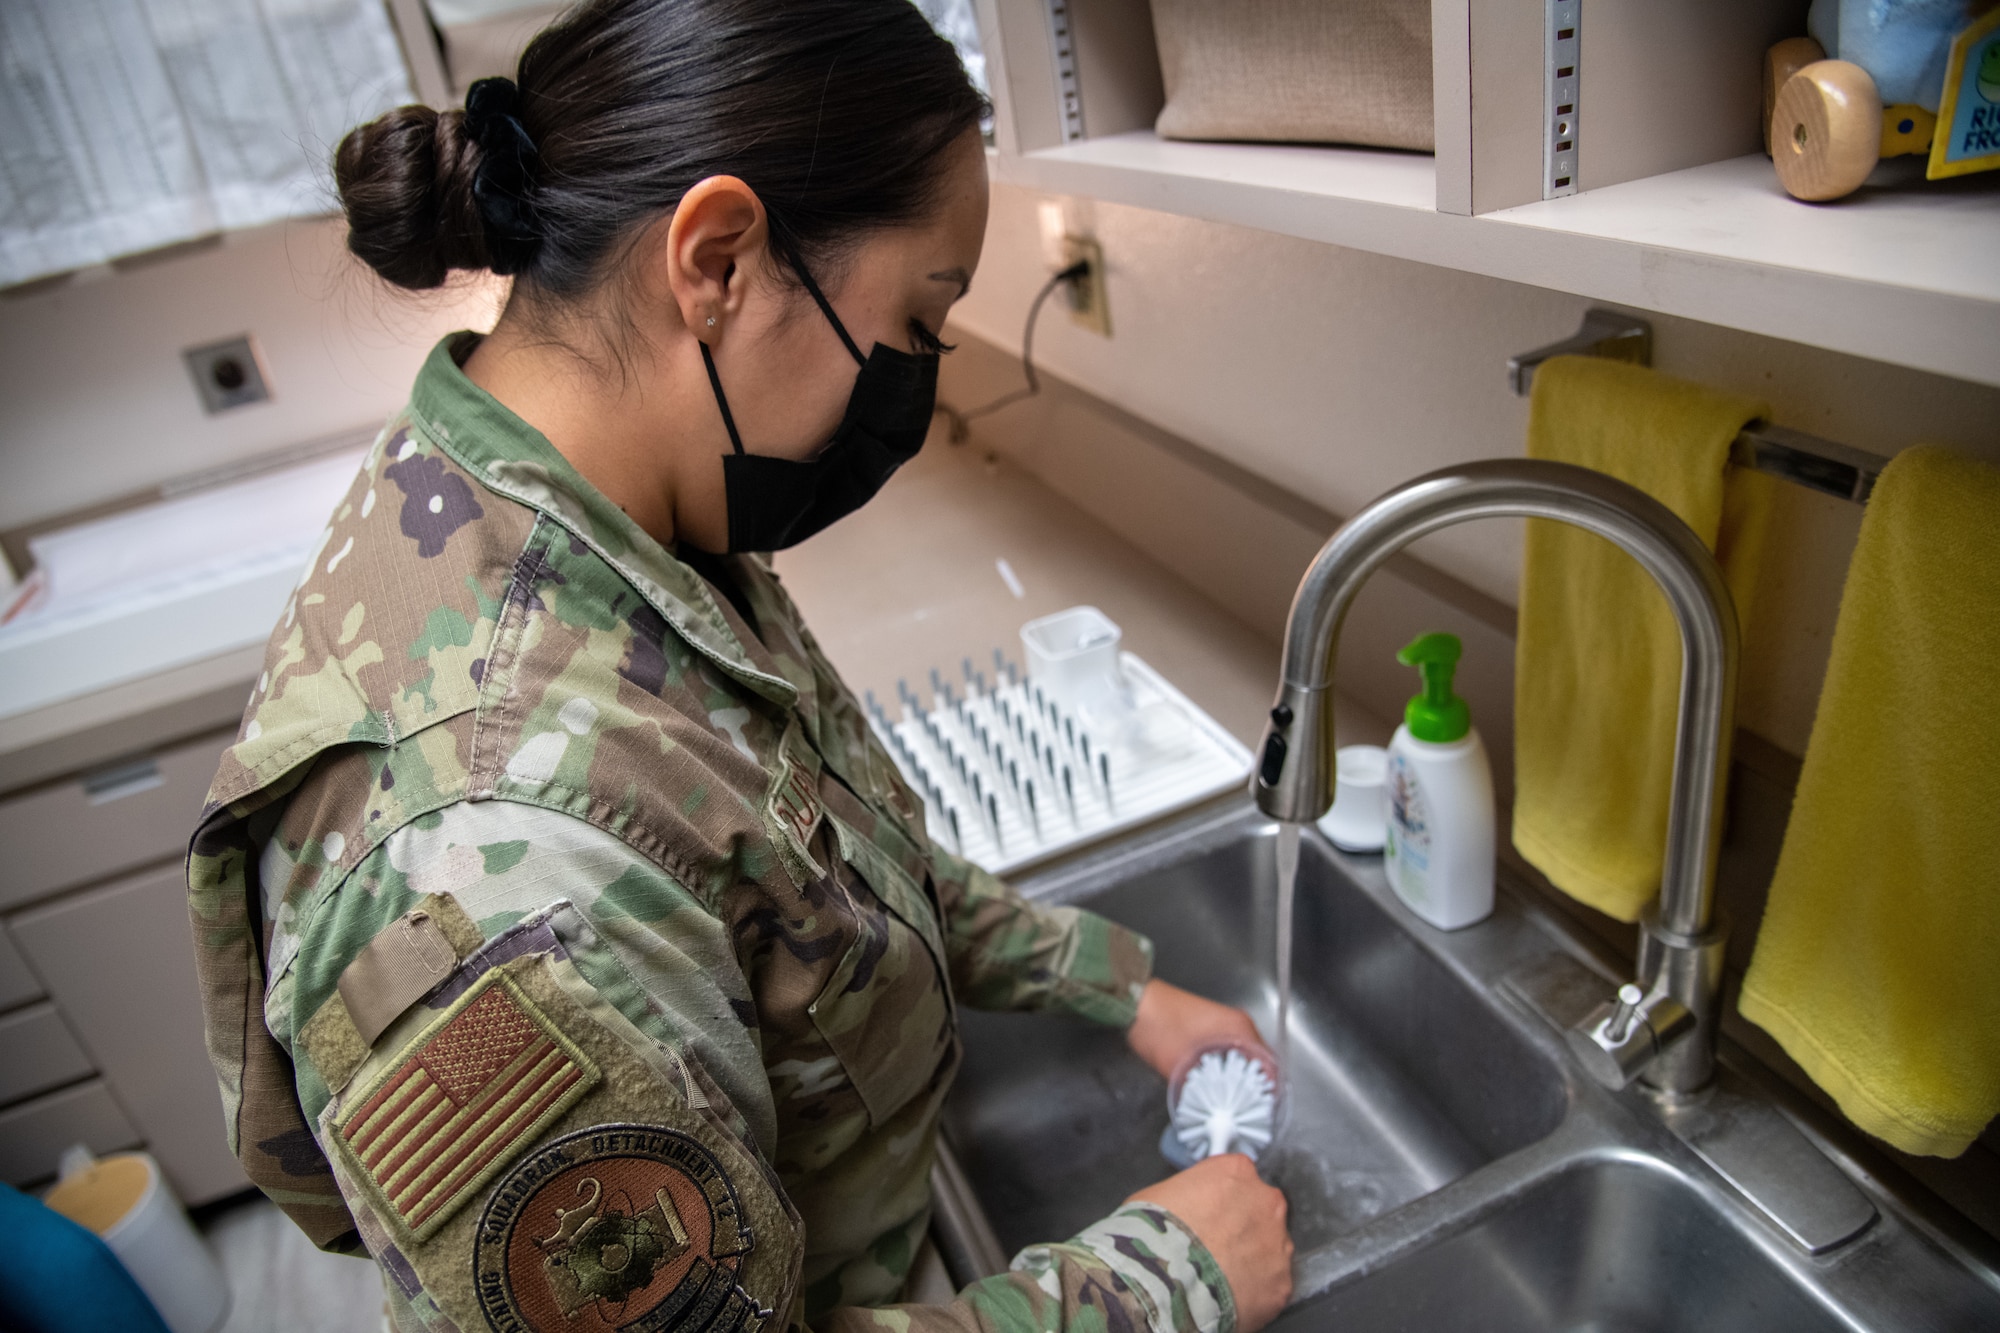 U.S. Air Force Staff Sgt. Kasandra Duran, 372nd Training Squadron Detachment 12 F-35A Lightning II weapons instructor, washes a baby bottle in the Detachment 12 lactation room Sept. 21, 2021, at Luke Air Force Base, Arizona. The lactation room, equipped with cleaning supplies to clean breast pump parts, a changing table and a sink, was created to support working mothers. The newly revived lactation room helps support Airmen and their families by enhancing facilities and equipment to support combat-ready Airmen. (U.S. Air Force photo by Staff Sgt. Collette Brooks)